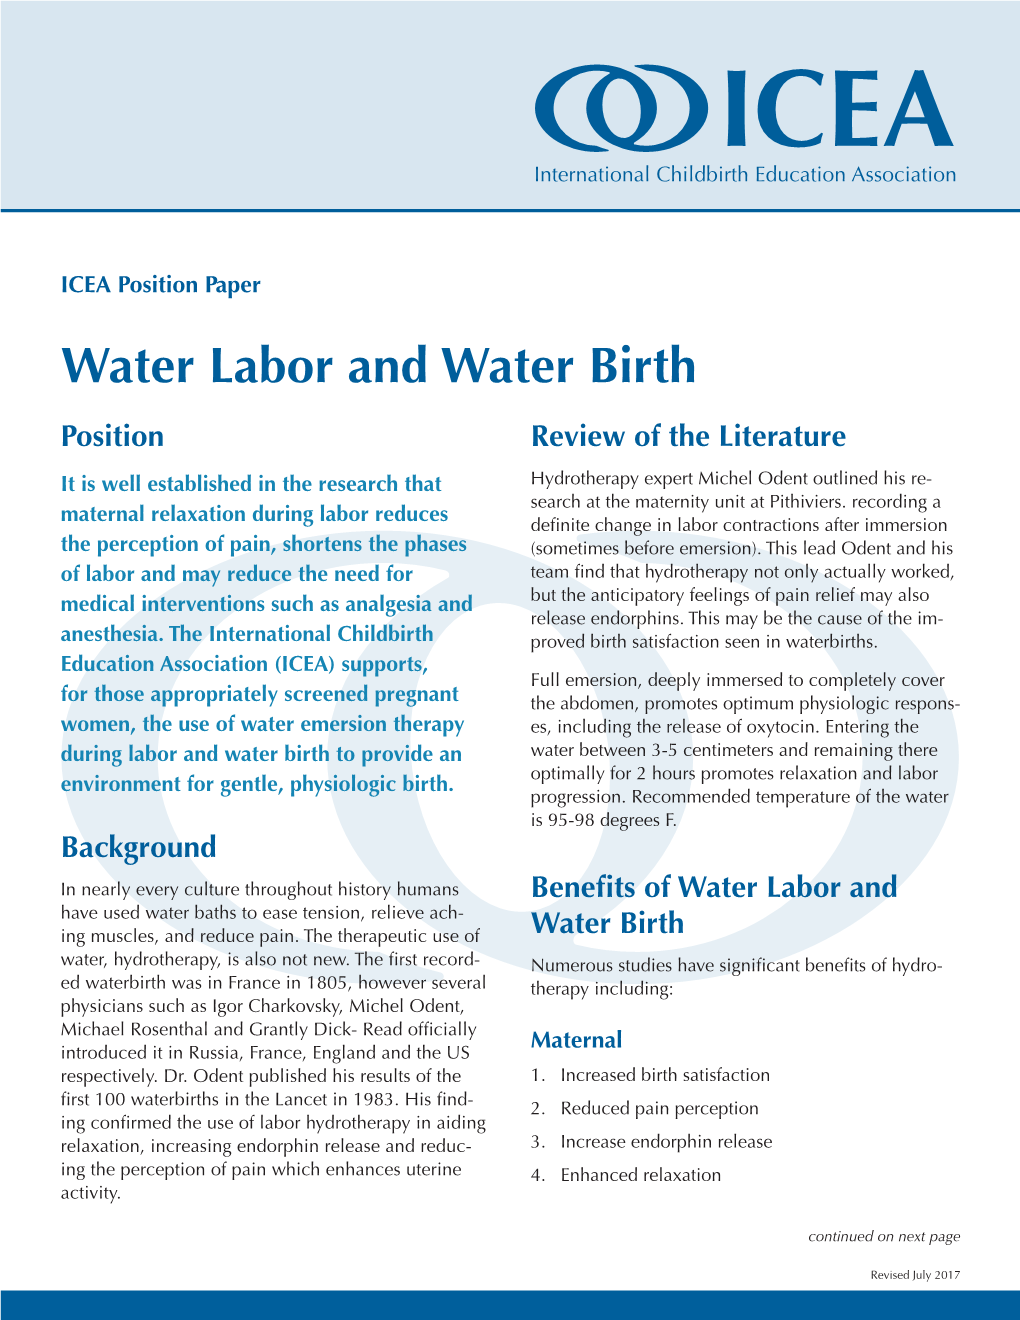 Water Labor and Water Birth